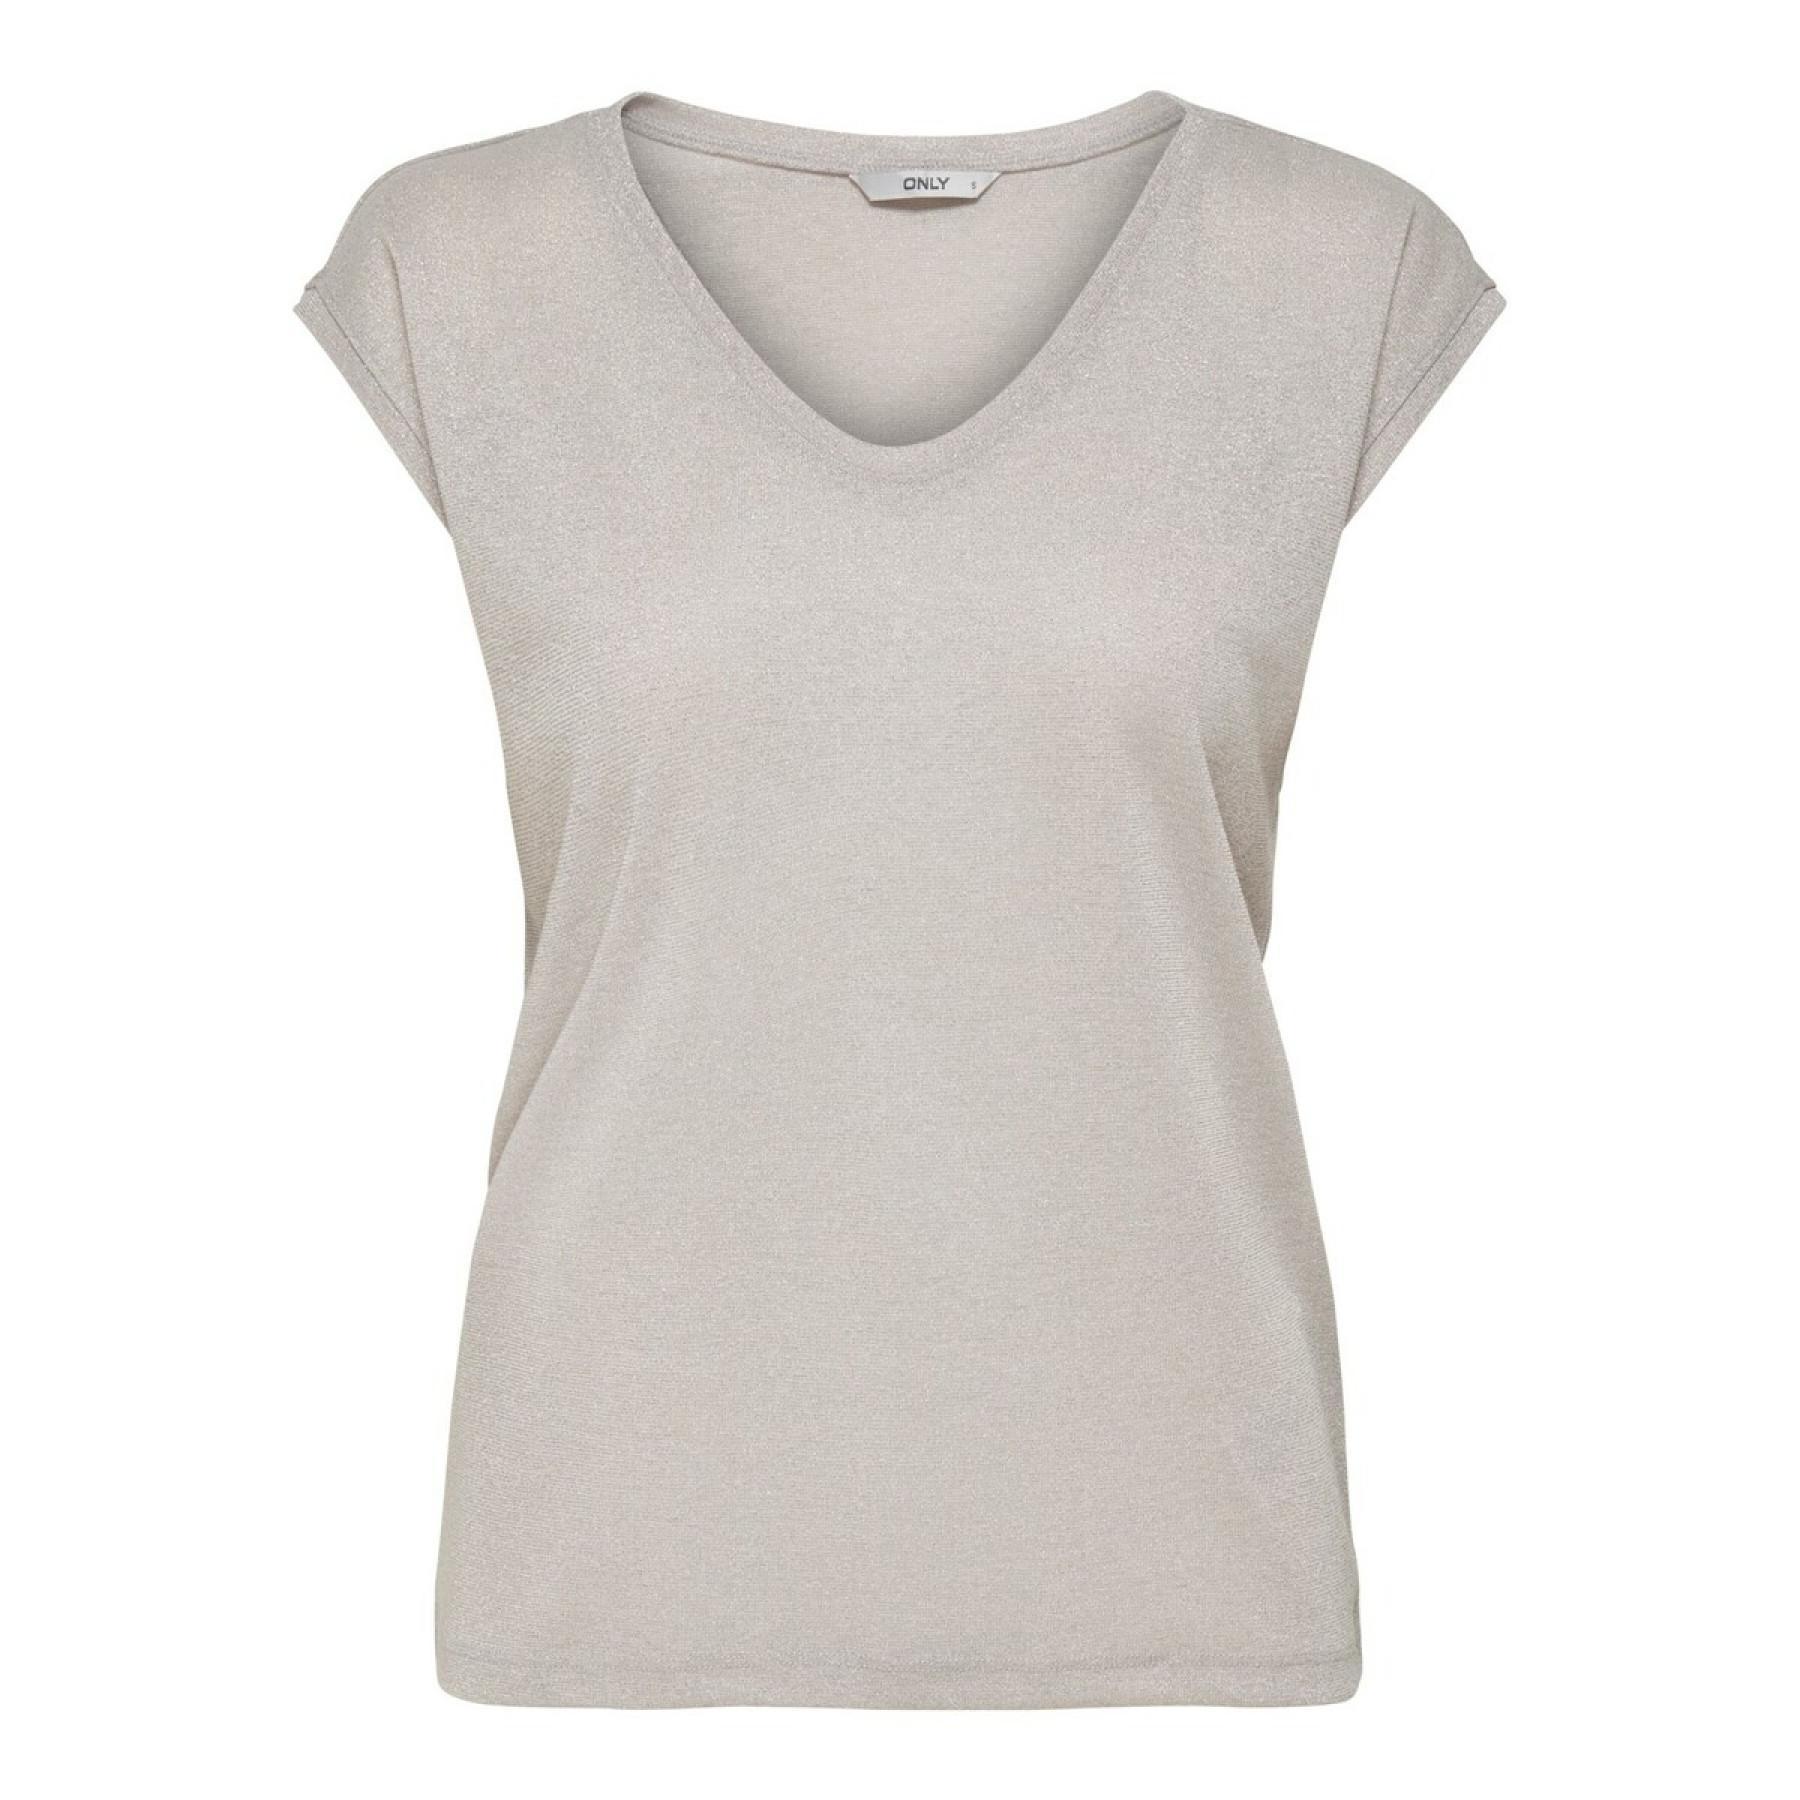 T-shirt femme Only Silvery manches courtes col V lurex